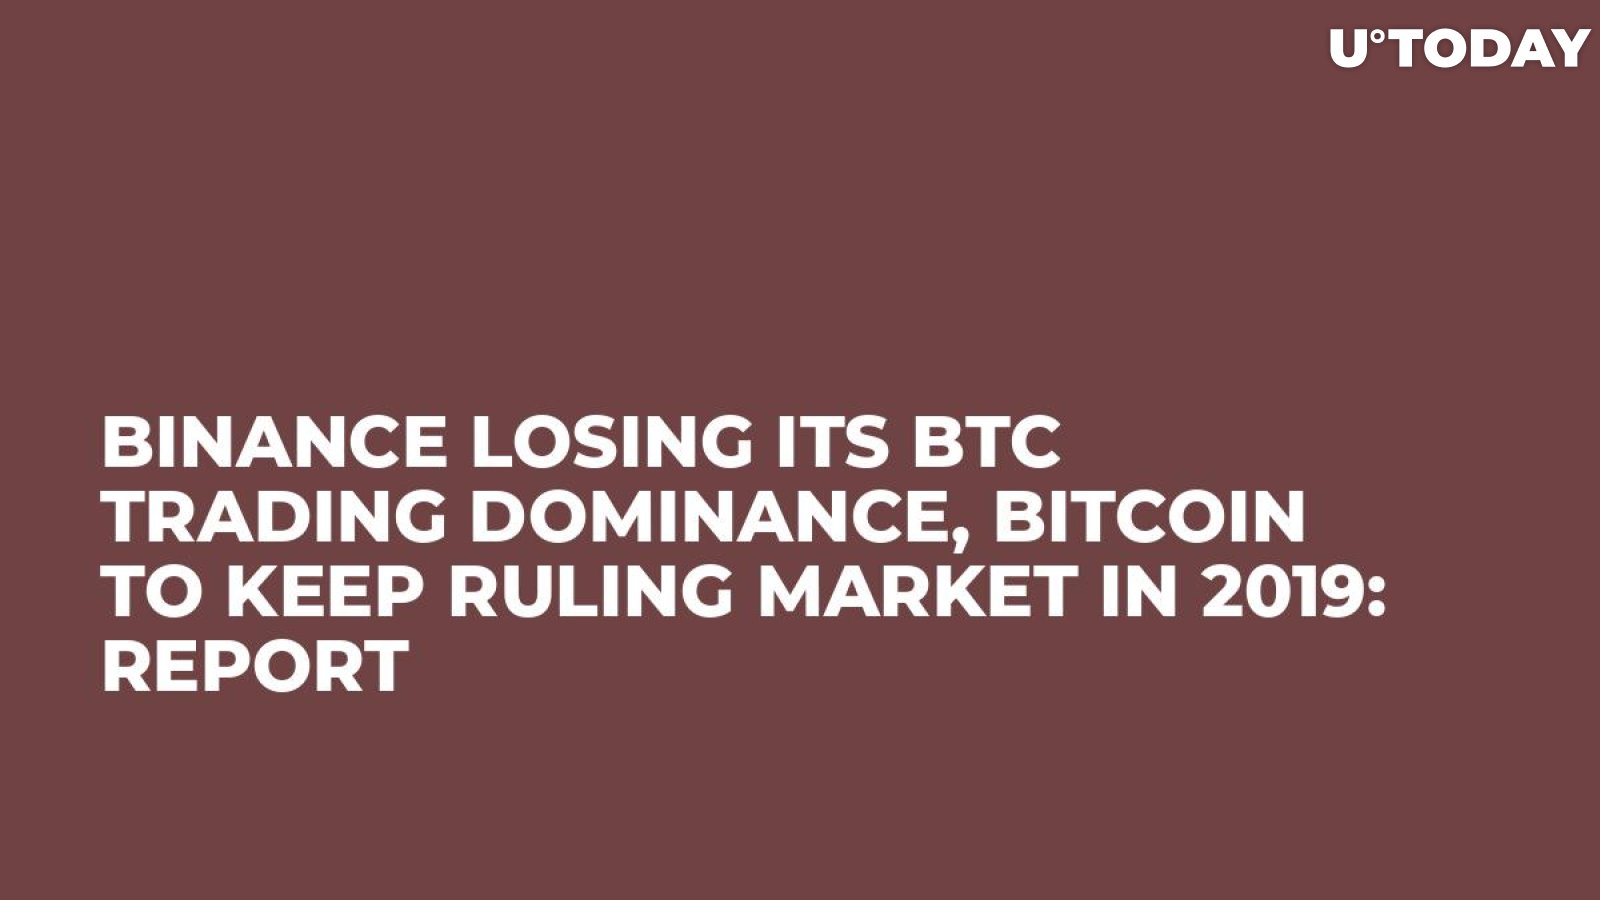 Binance Losing Its BTC Trading Dominance, Bitcoin to Keep Ruling Market in 2019: Report